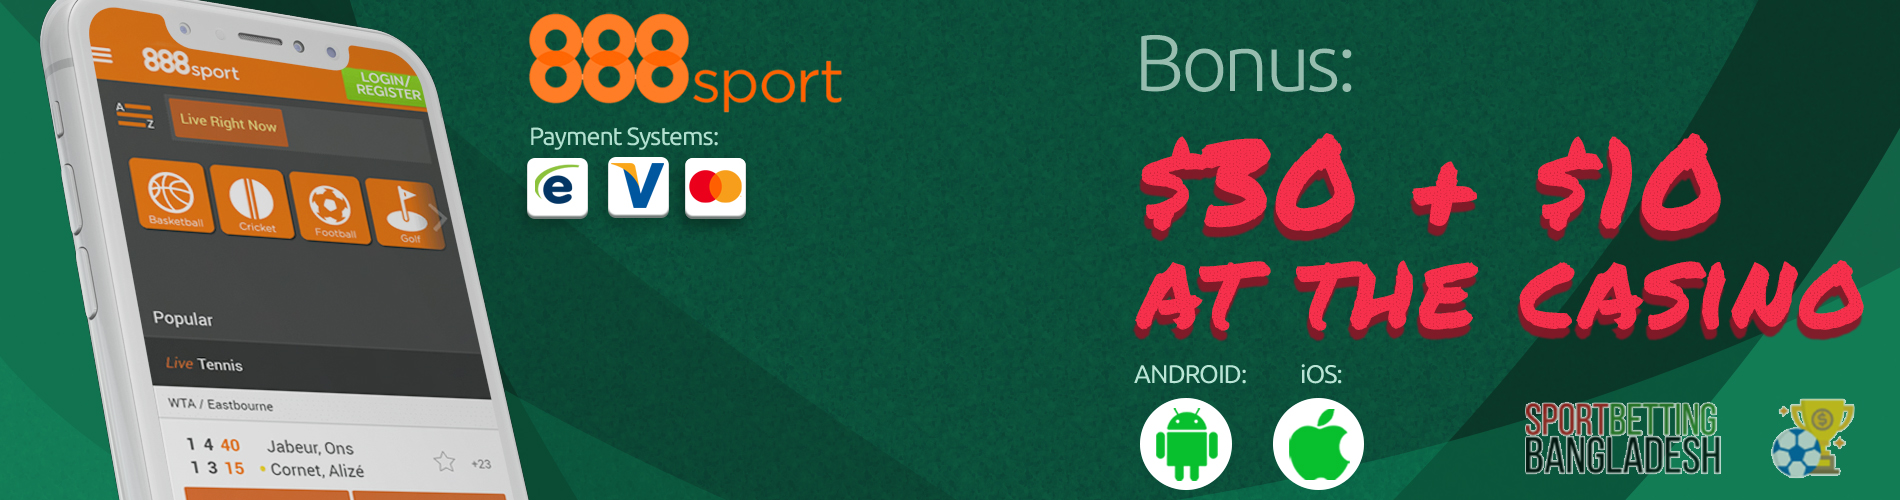 888sport Bangladesh app: payment systems, available platforms, welcome bonus.